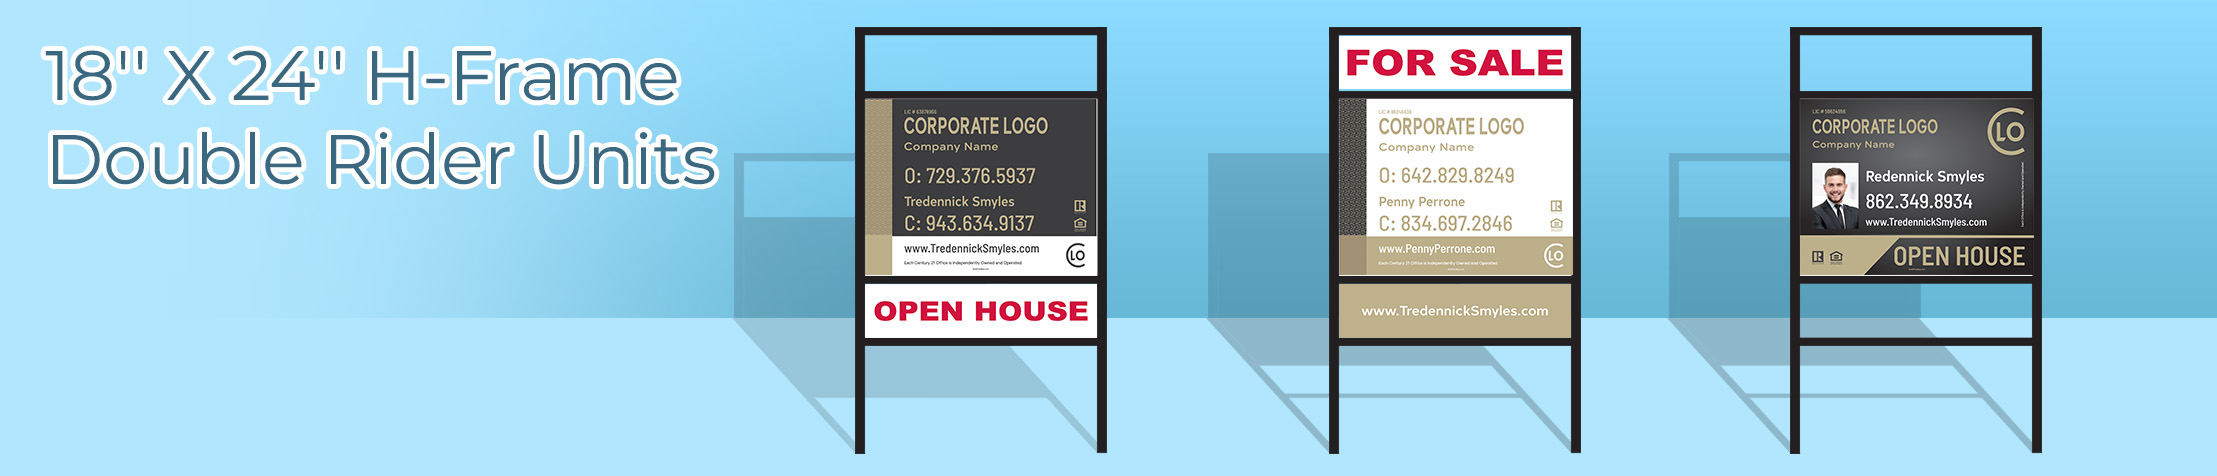 Century 21 Real Estate 18'' x 24'' H-Frame Double Rider Units - Century 21  real estate signs | BestPrintBuy.com